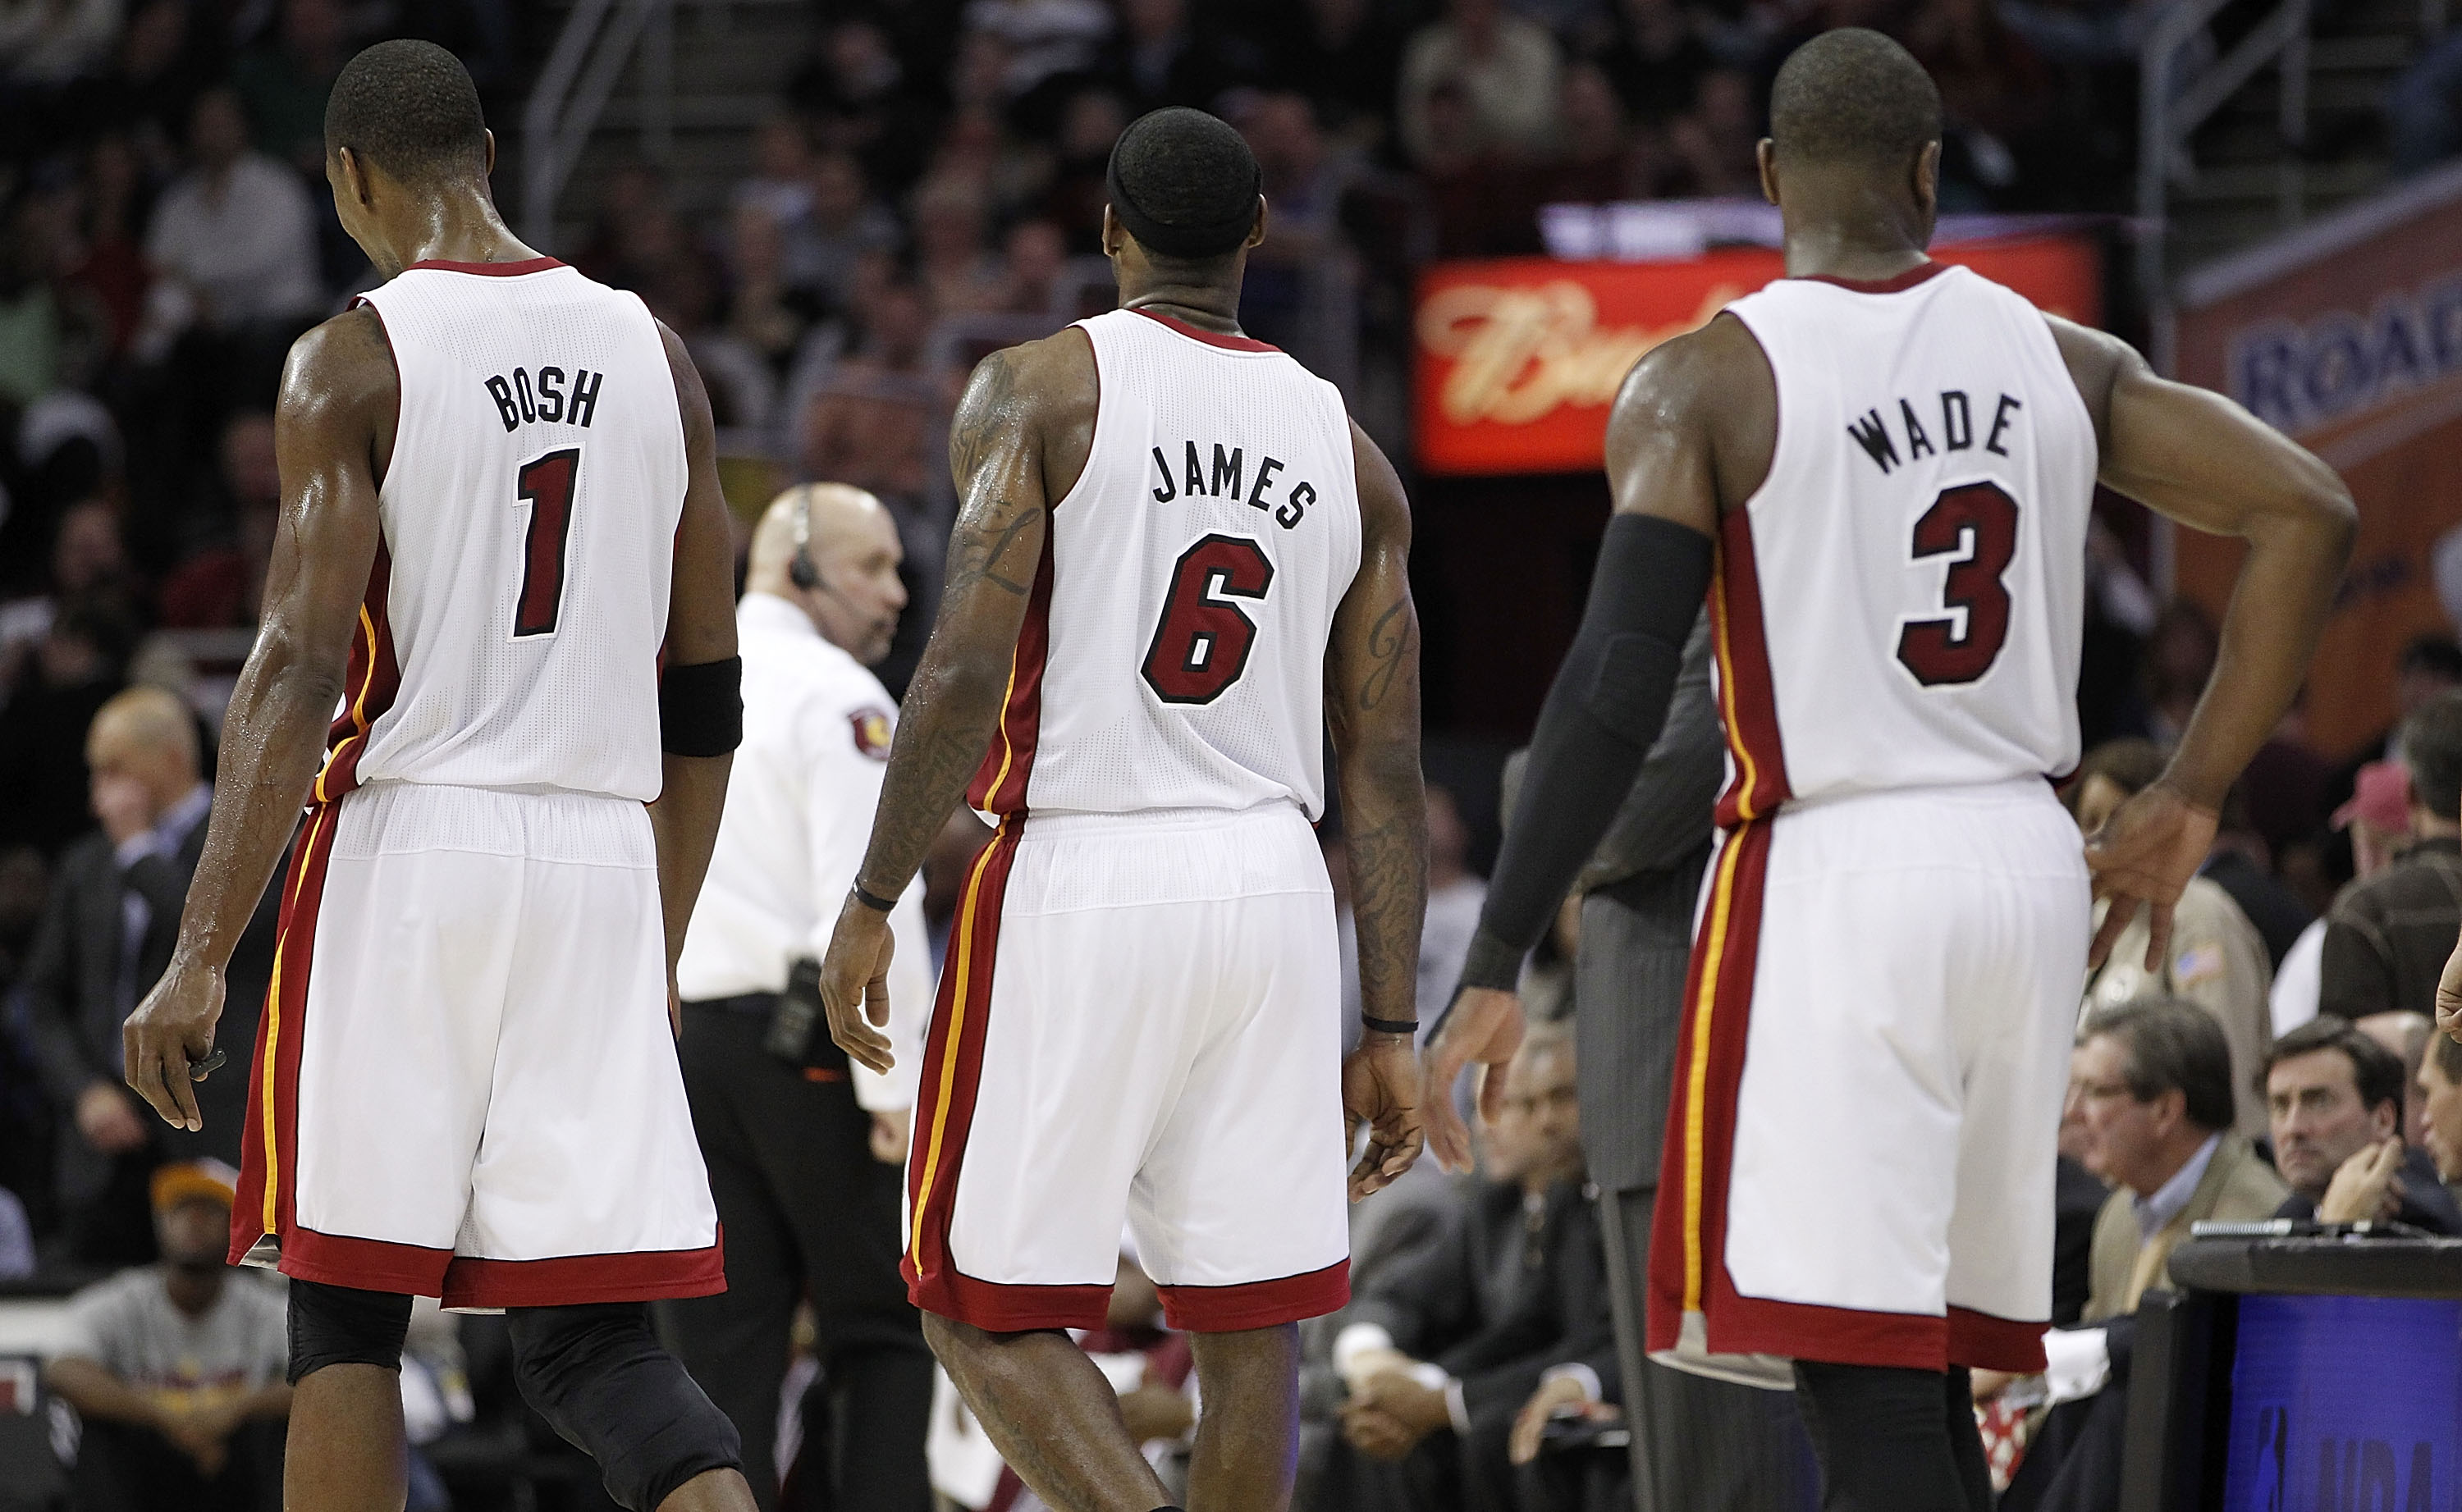 LeBron James erupts on Mario Chalmers during a timeout